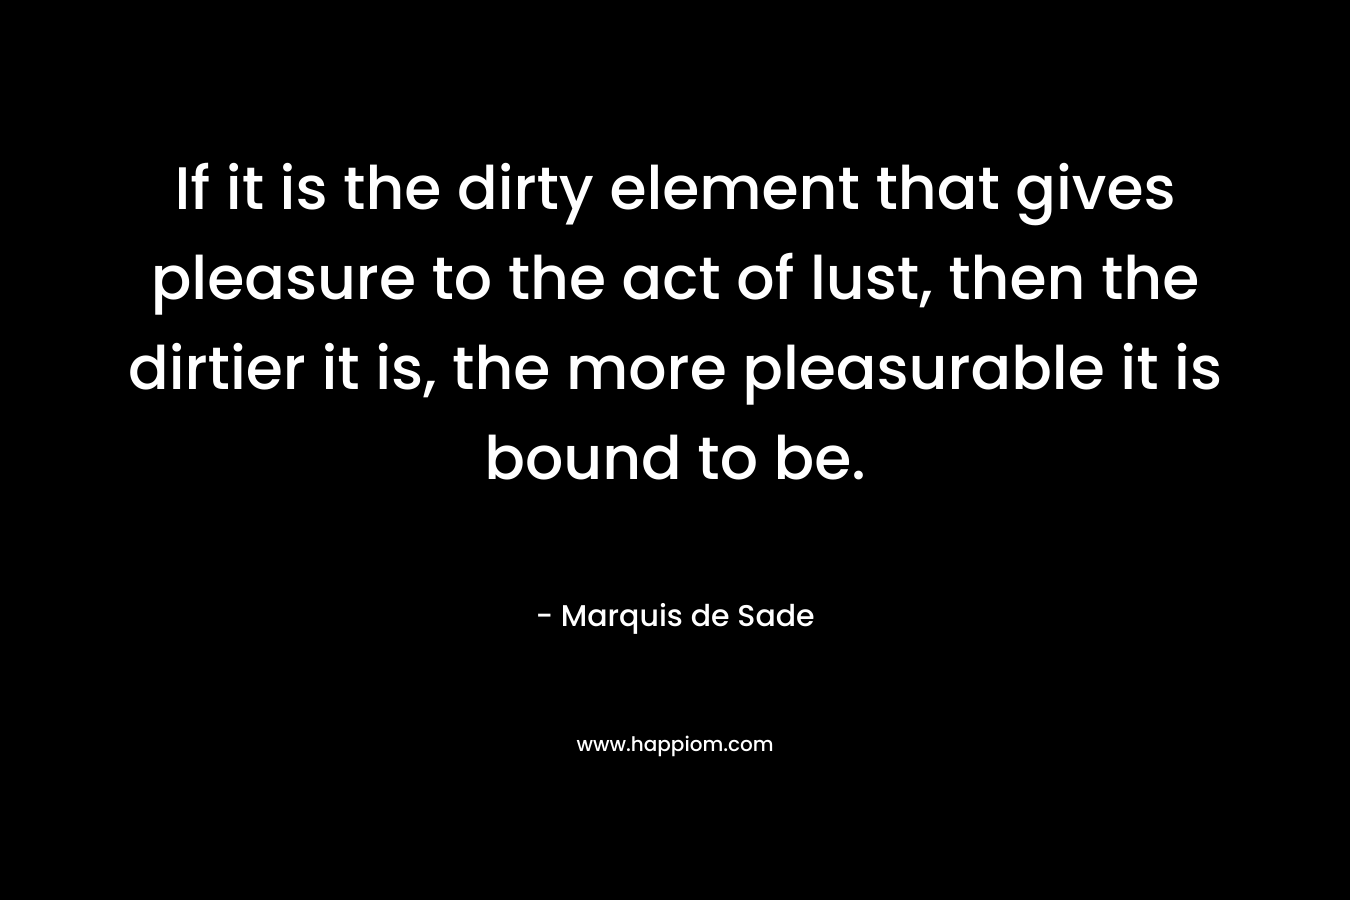 If it is the dirty element that gives pleasure to the act of lust, then the dirtier it is, the more pleasurable it is bound to be. – Marquis de Sade